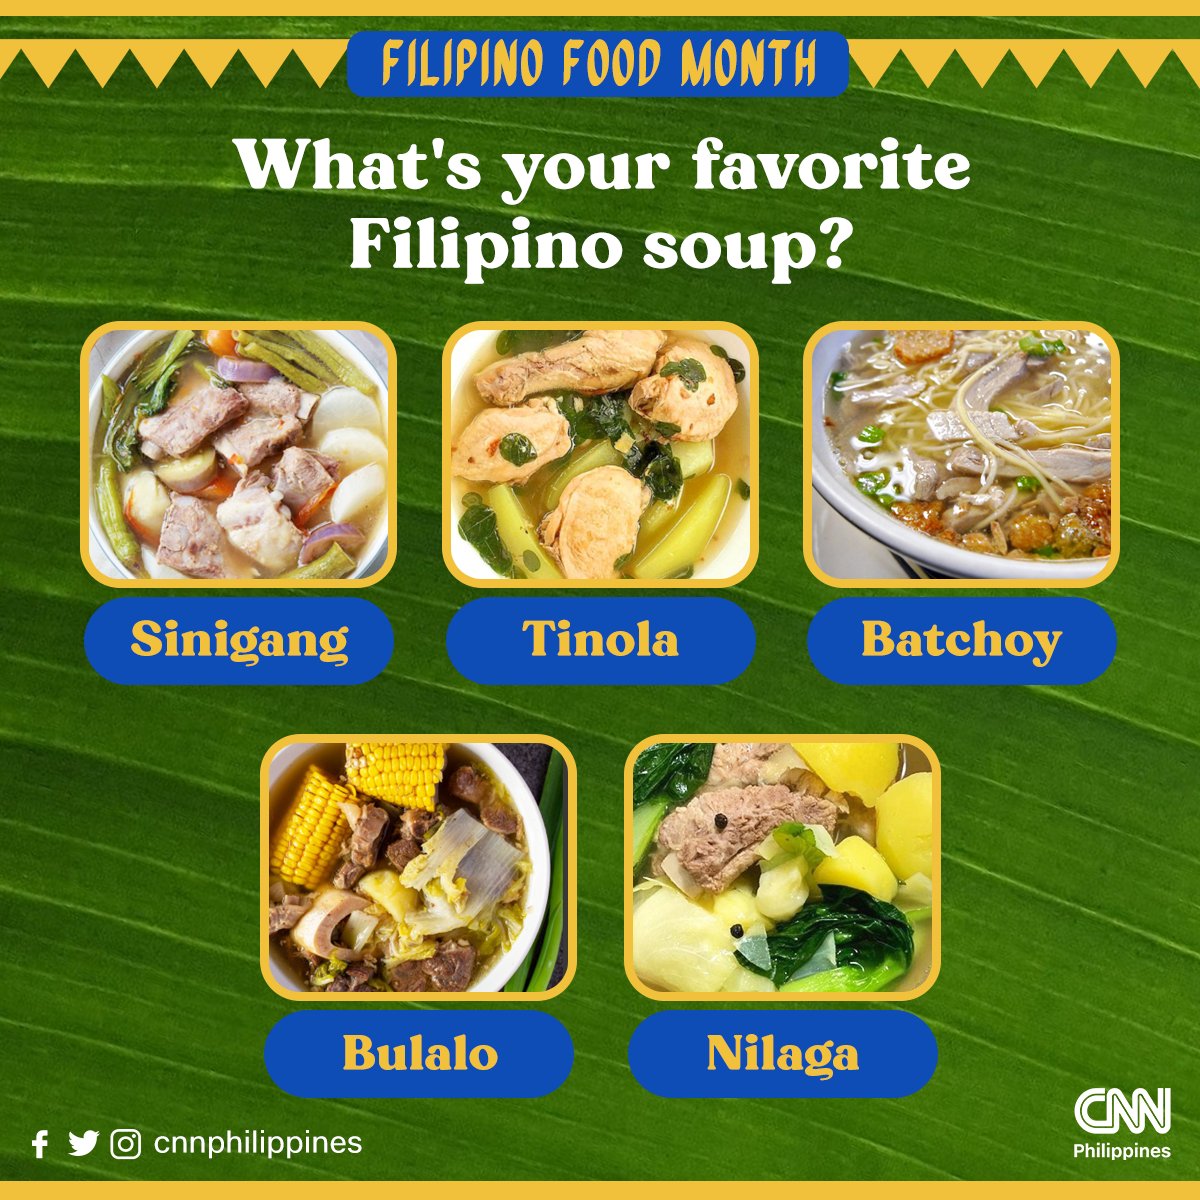 Battle of the soups. #FilipinoFoodMonth 

Which Filipino dish reigns supreme? 🍲